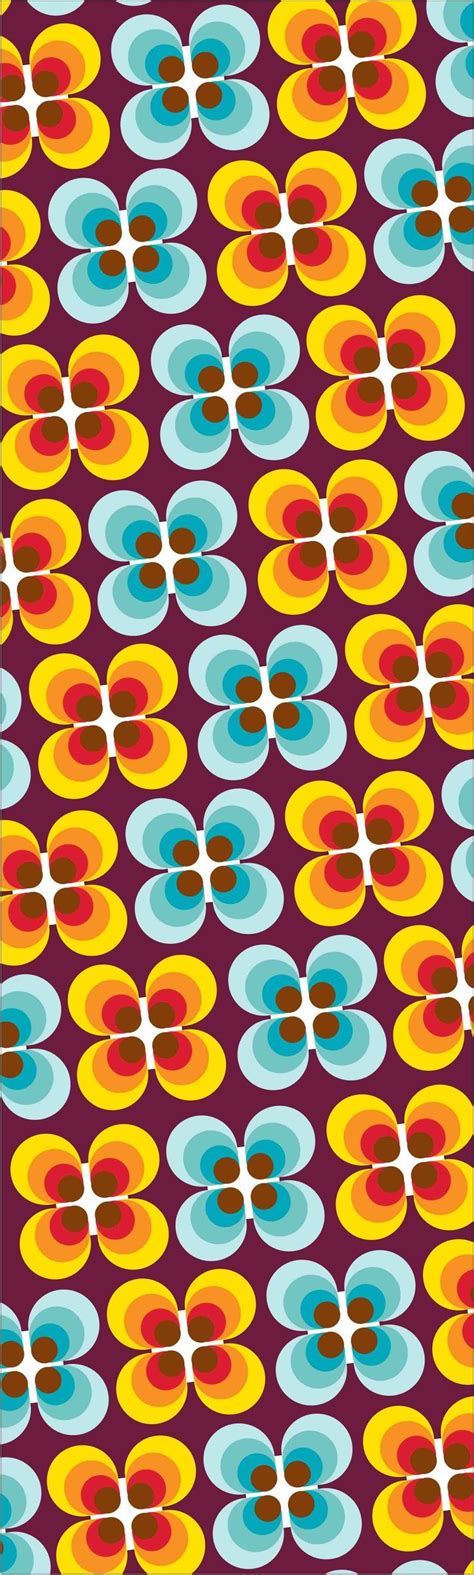 Image Result For 70s Patterns Retro Pattern Print Patterns Graphic